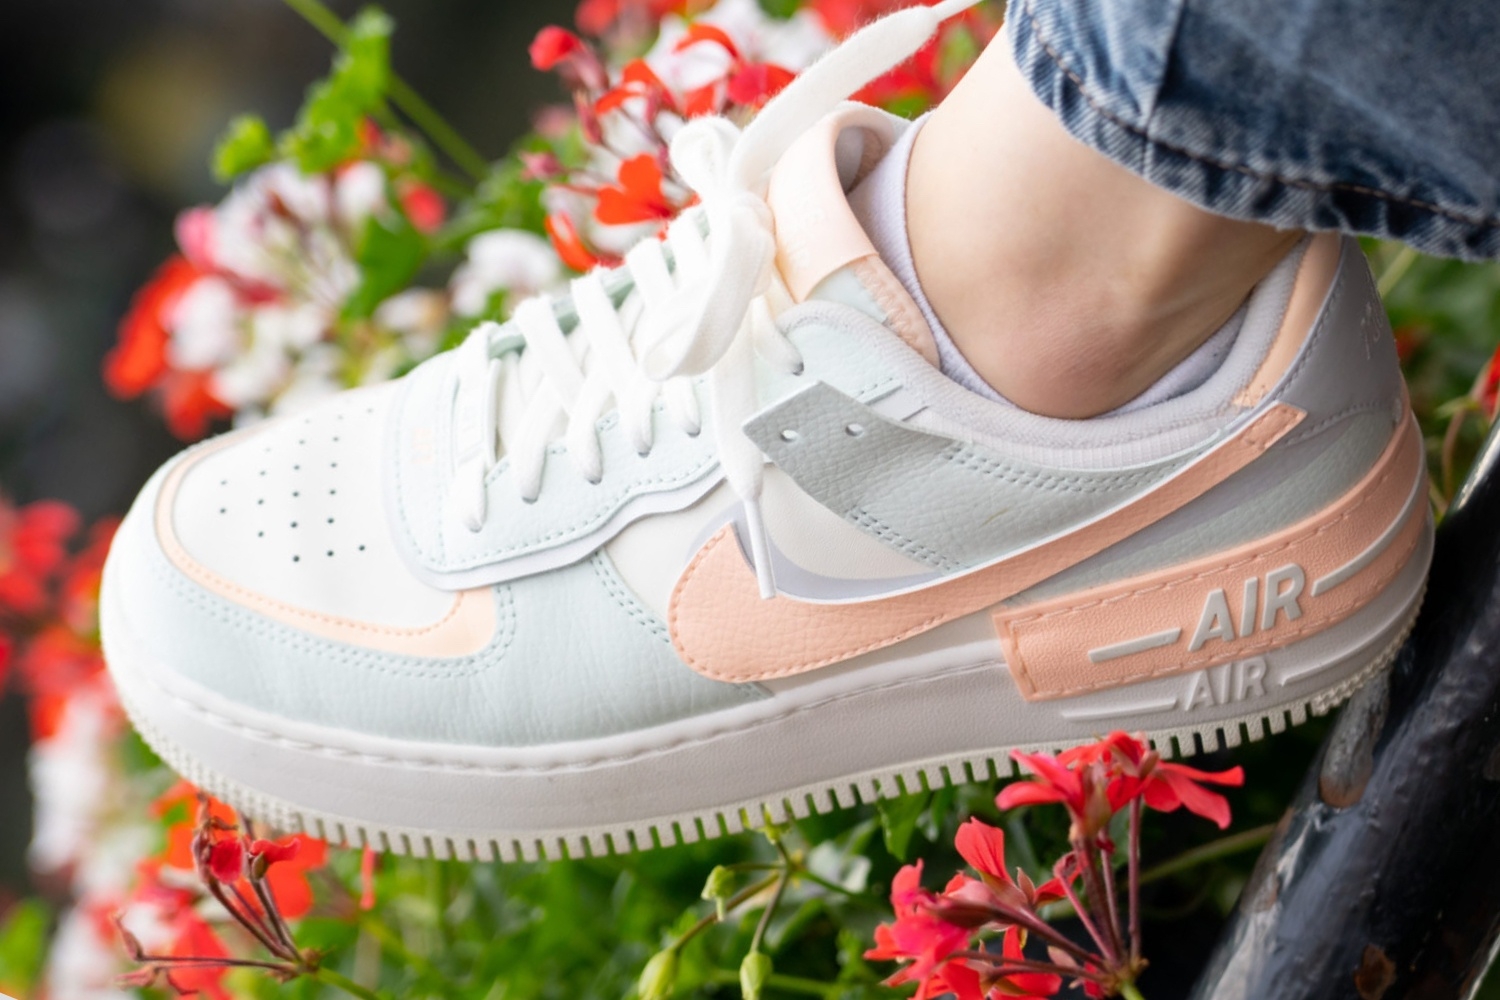 Nike Air Force 1 WMNS Model - Our Top Picks